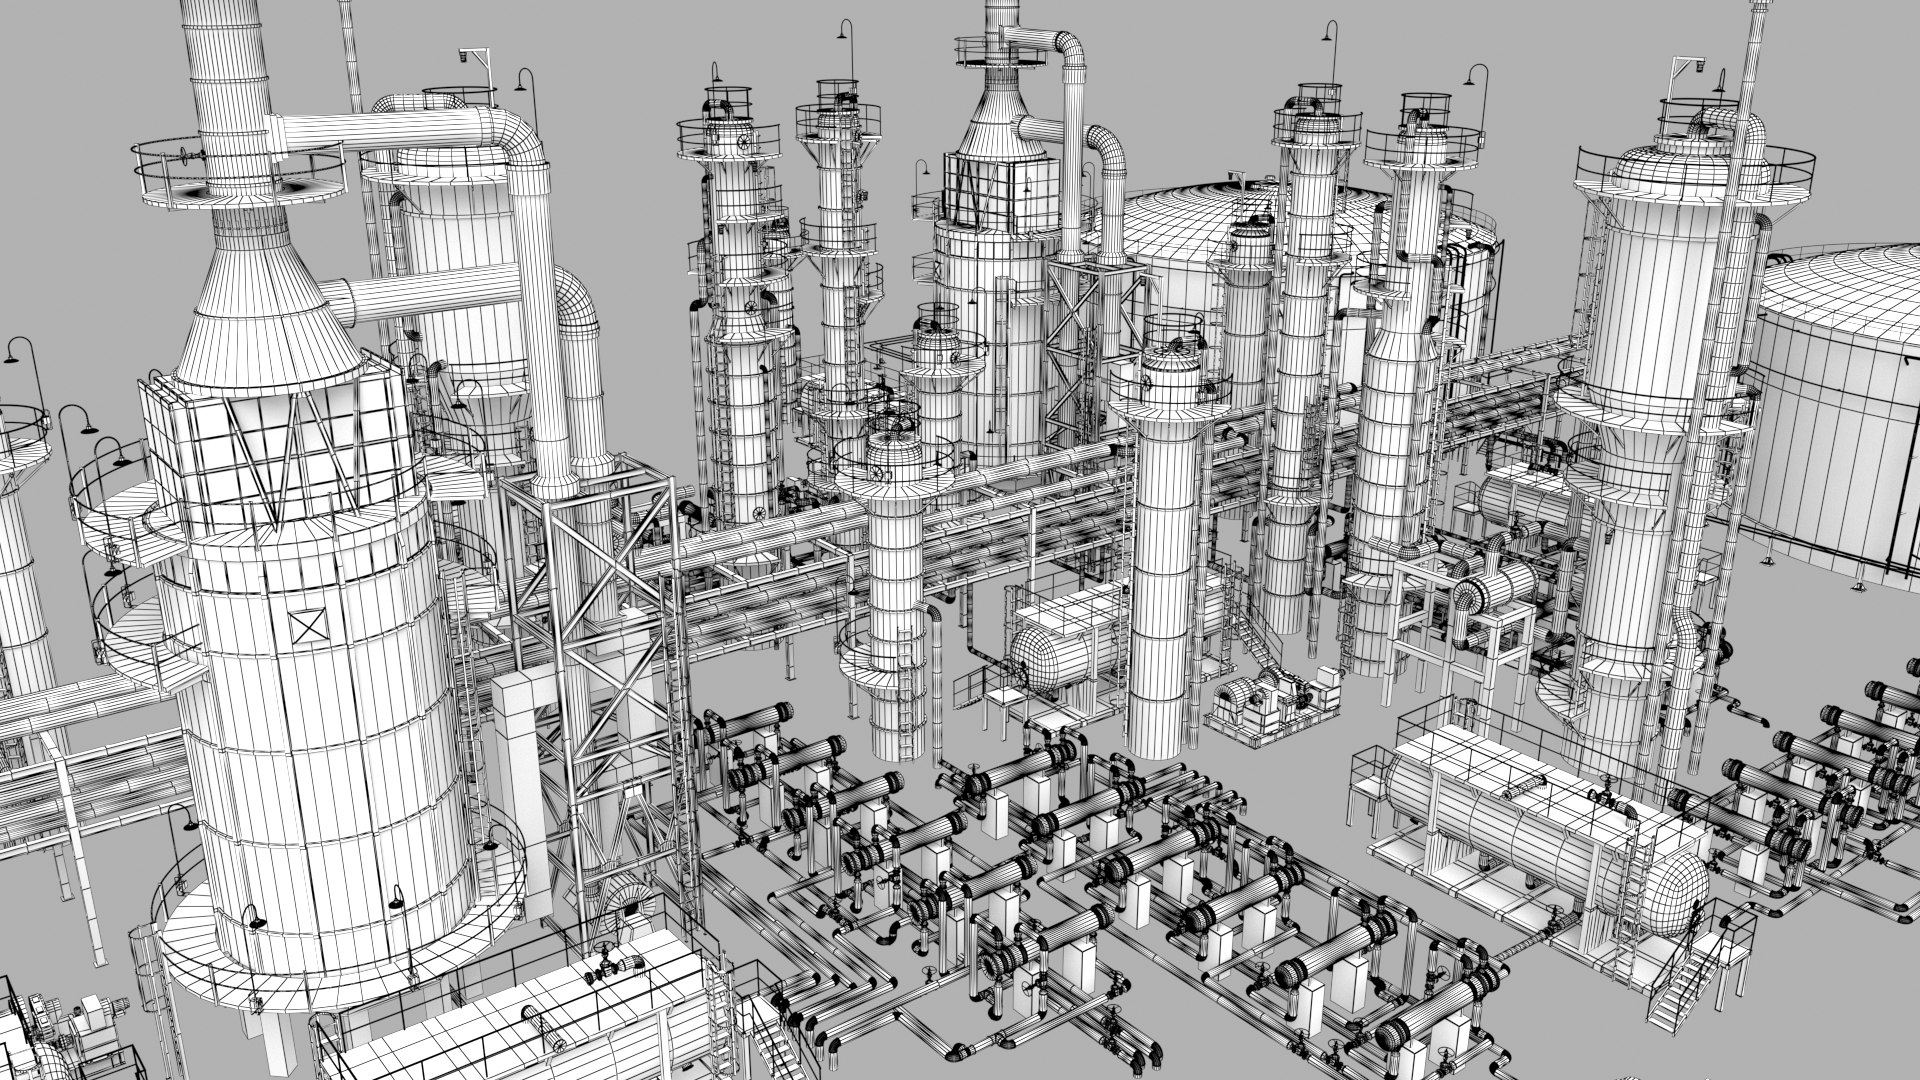 4321 Refinery Drawing Images Stock Photos  Vectors  Shutterstock